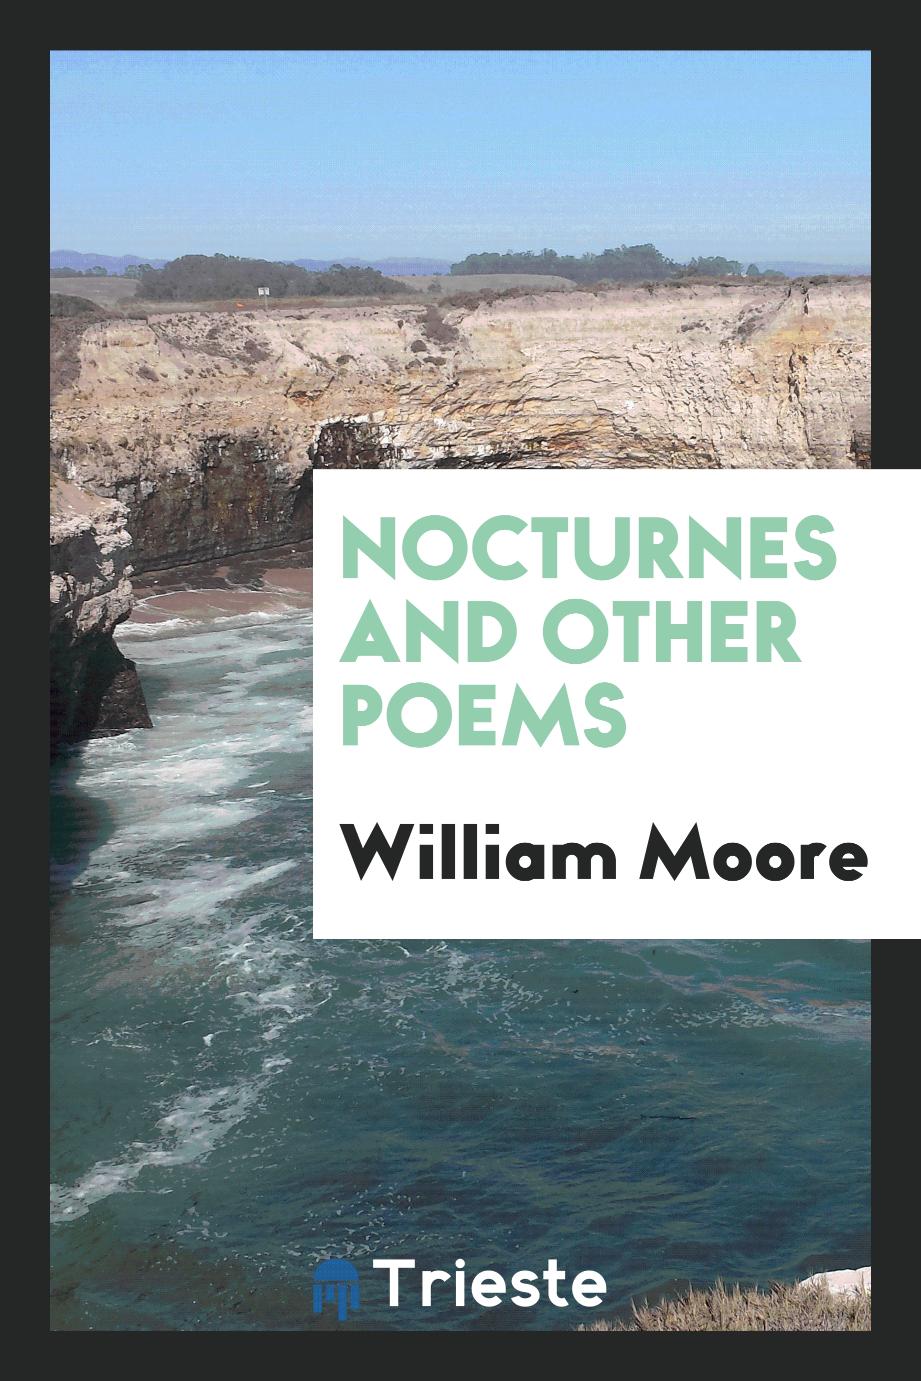 Nocturnes and Other Poems